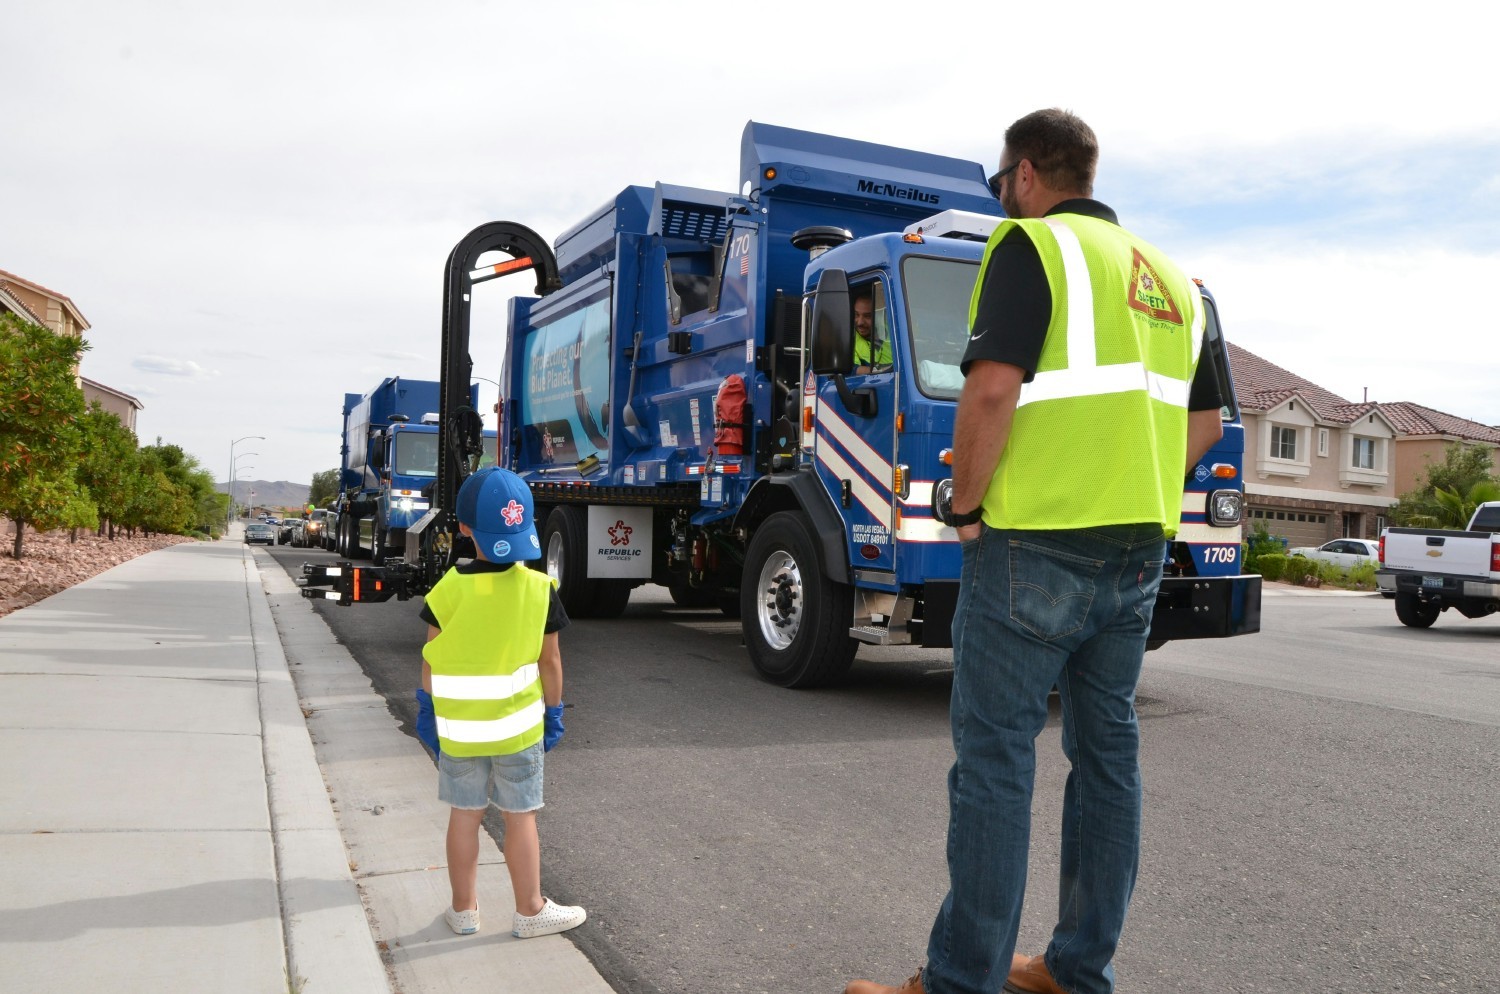 Team members organize a parade for a birthday. The team surprised the boy with 2 trucks and a fleet of support vehicles.